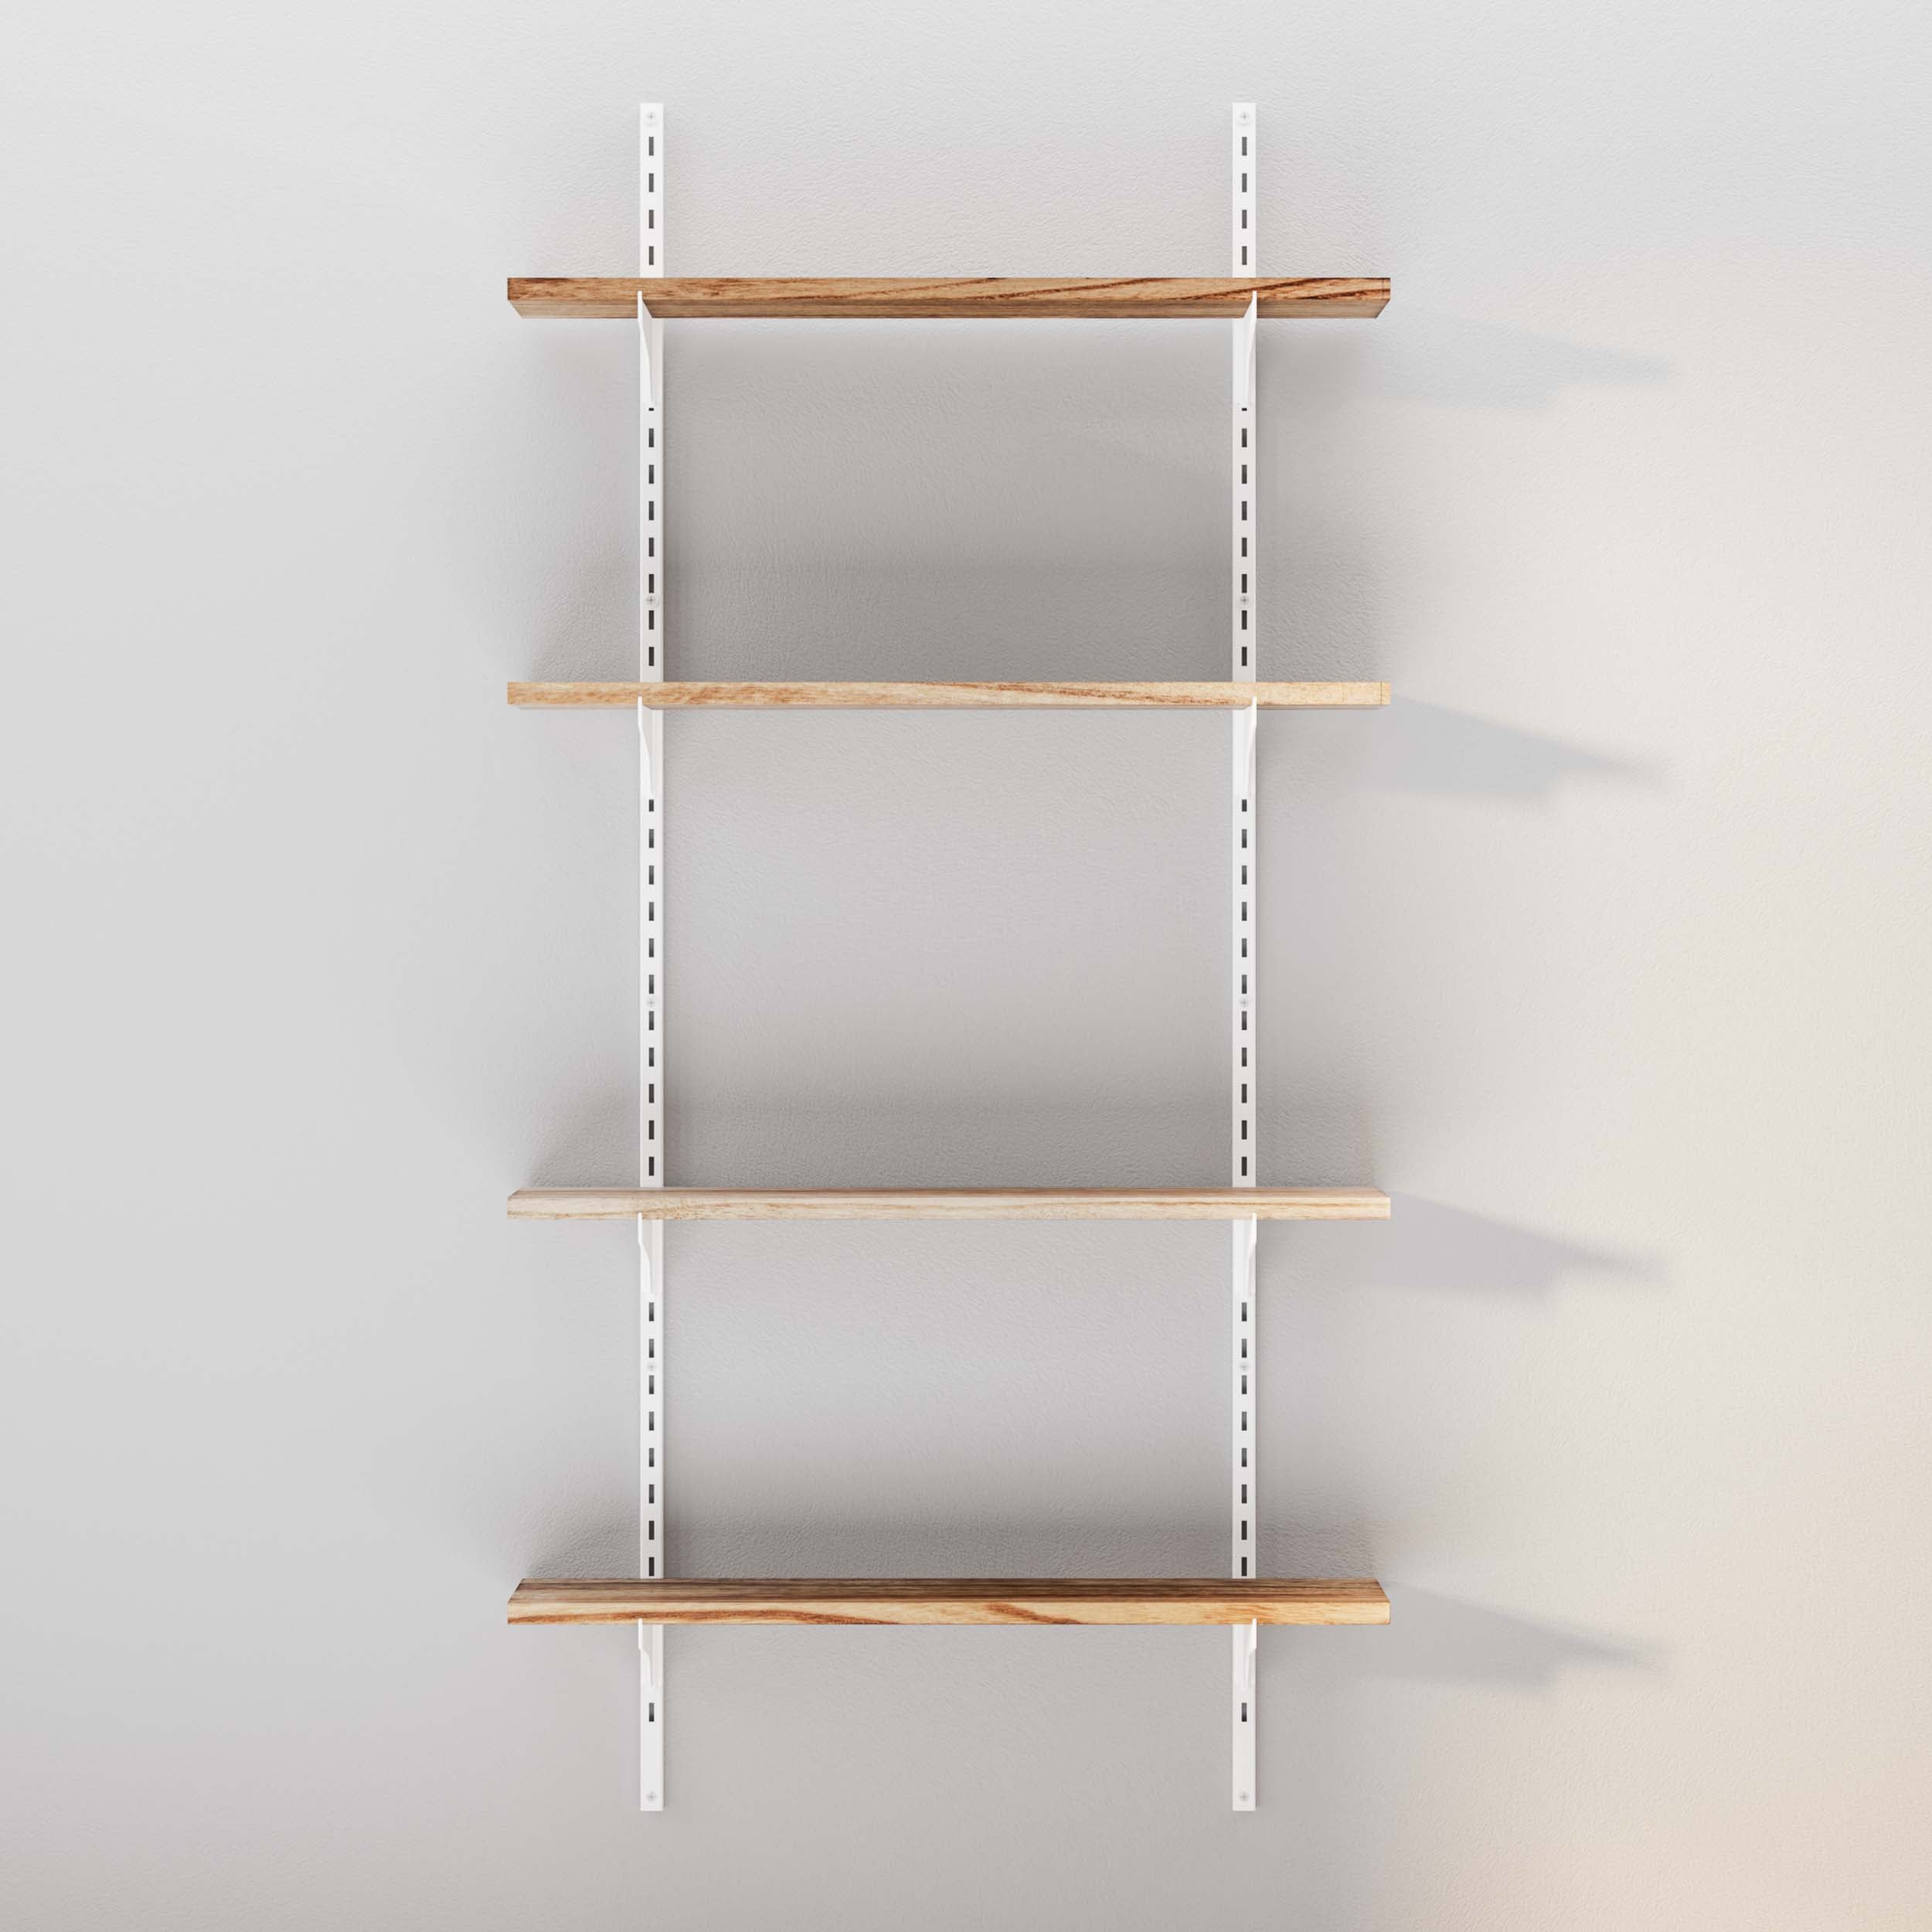 Empty wooden shelves with white brackets against a grey wall.